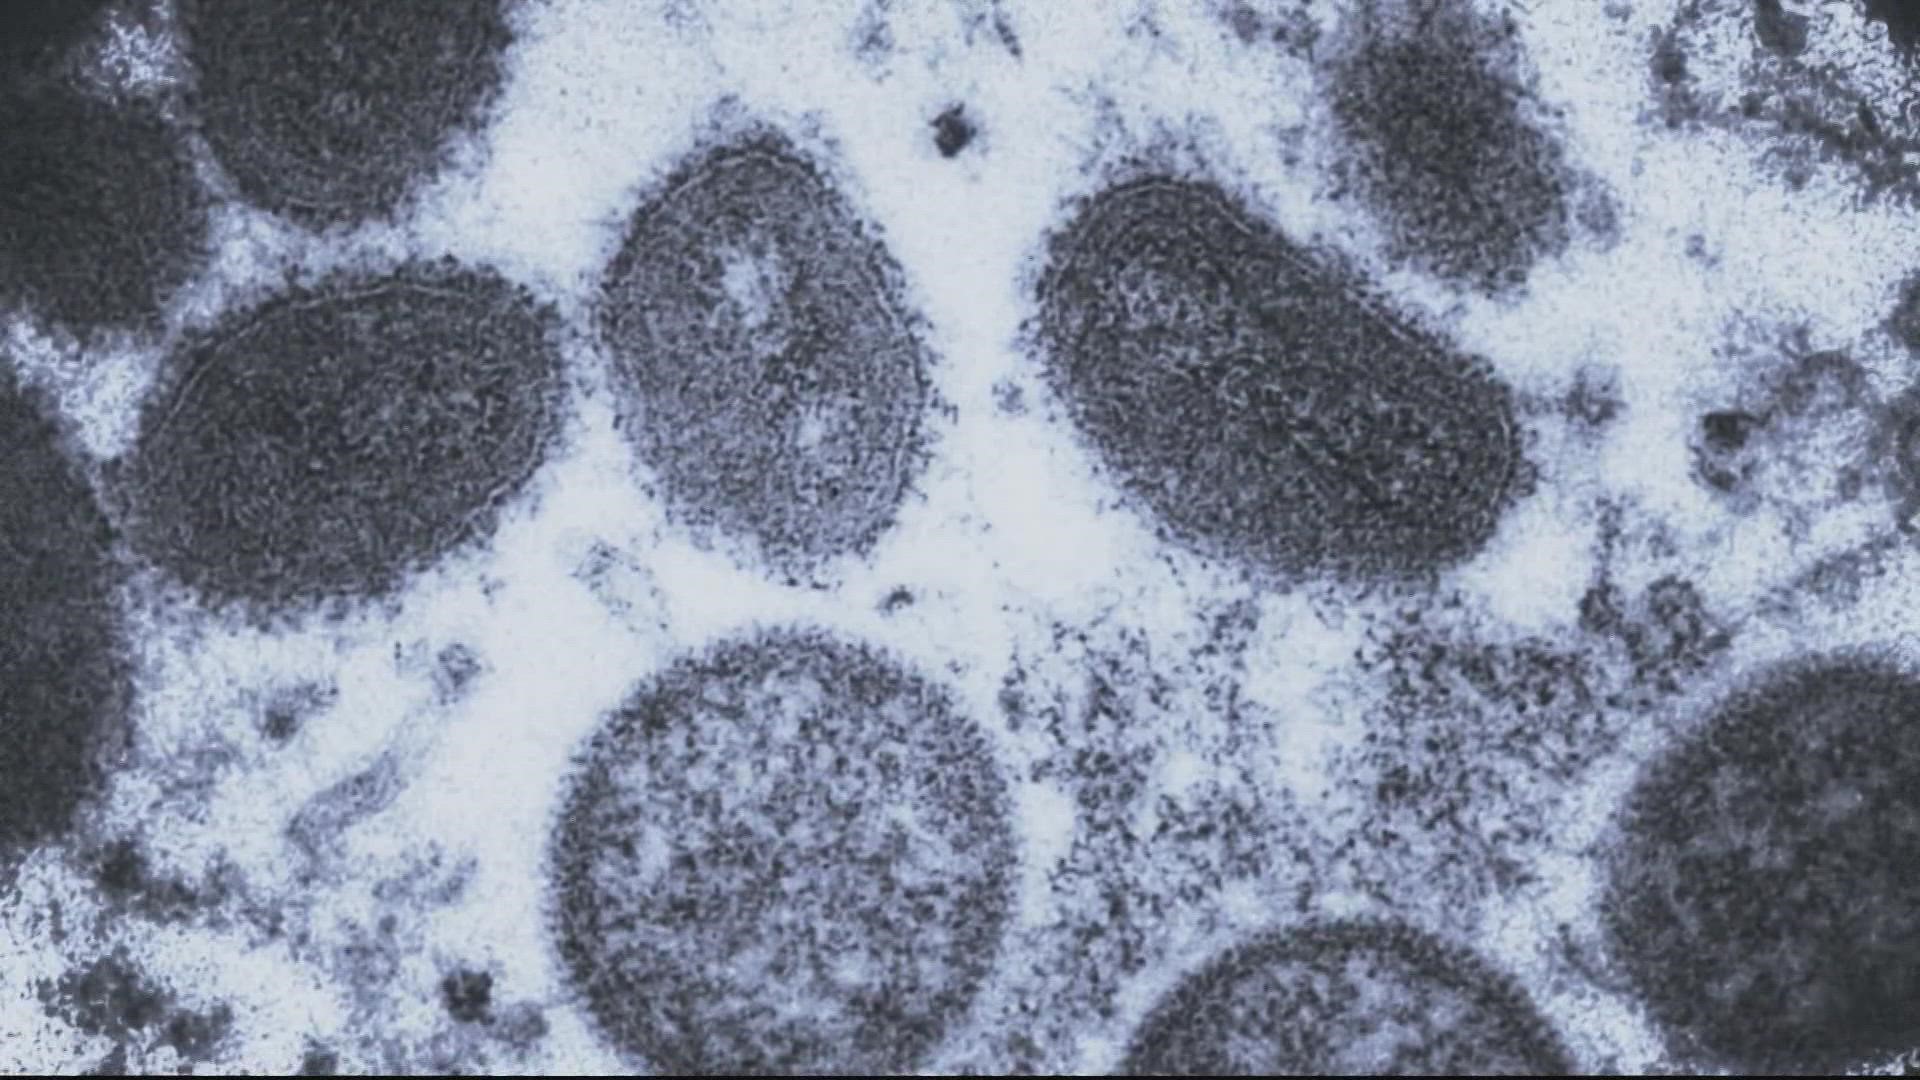 Virginia health officials are awaiting test results from the CDC to confirm that the woman has tested positive for the virus.